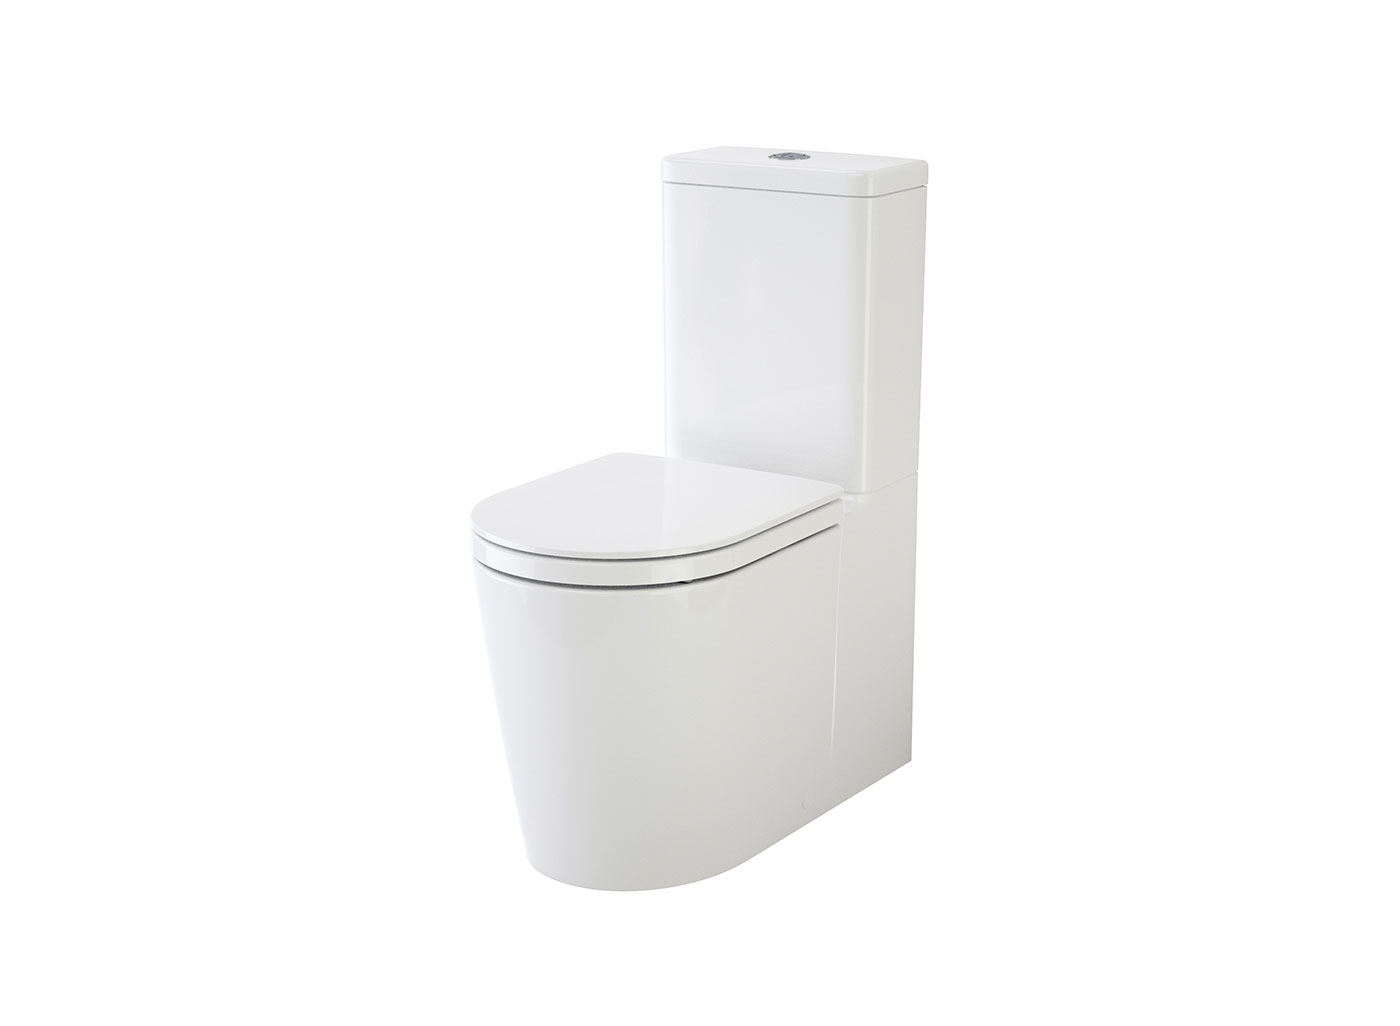 Liano toilet suites offer the ideal combination of contemporary style and seamless functionality